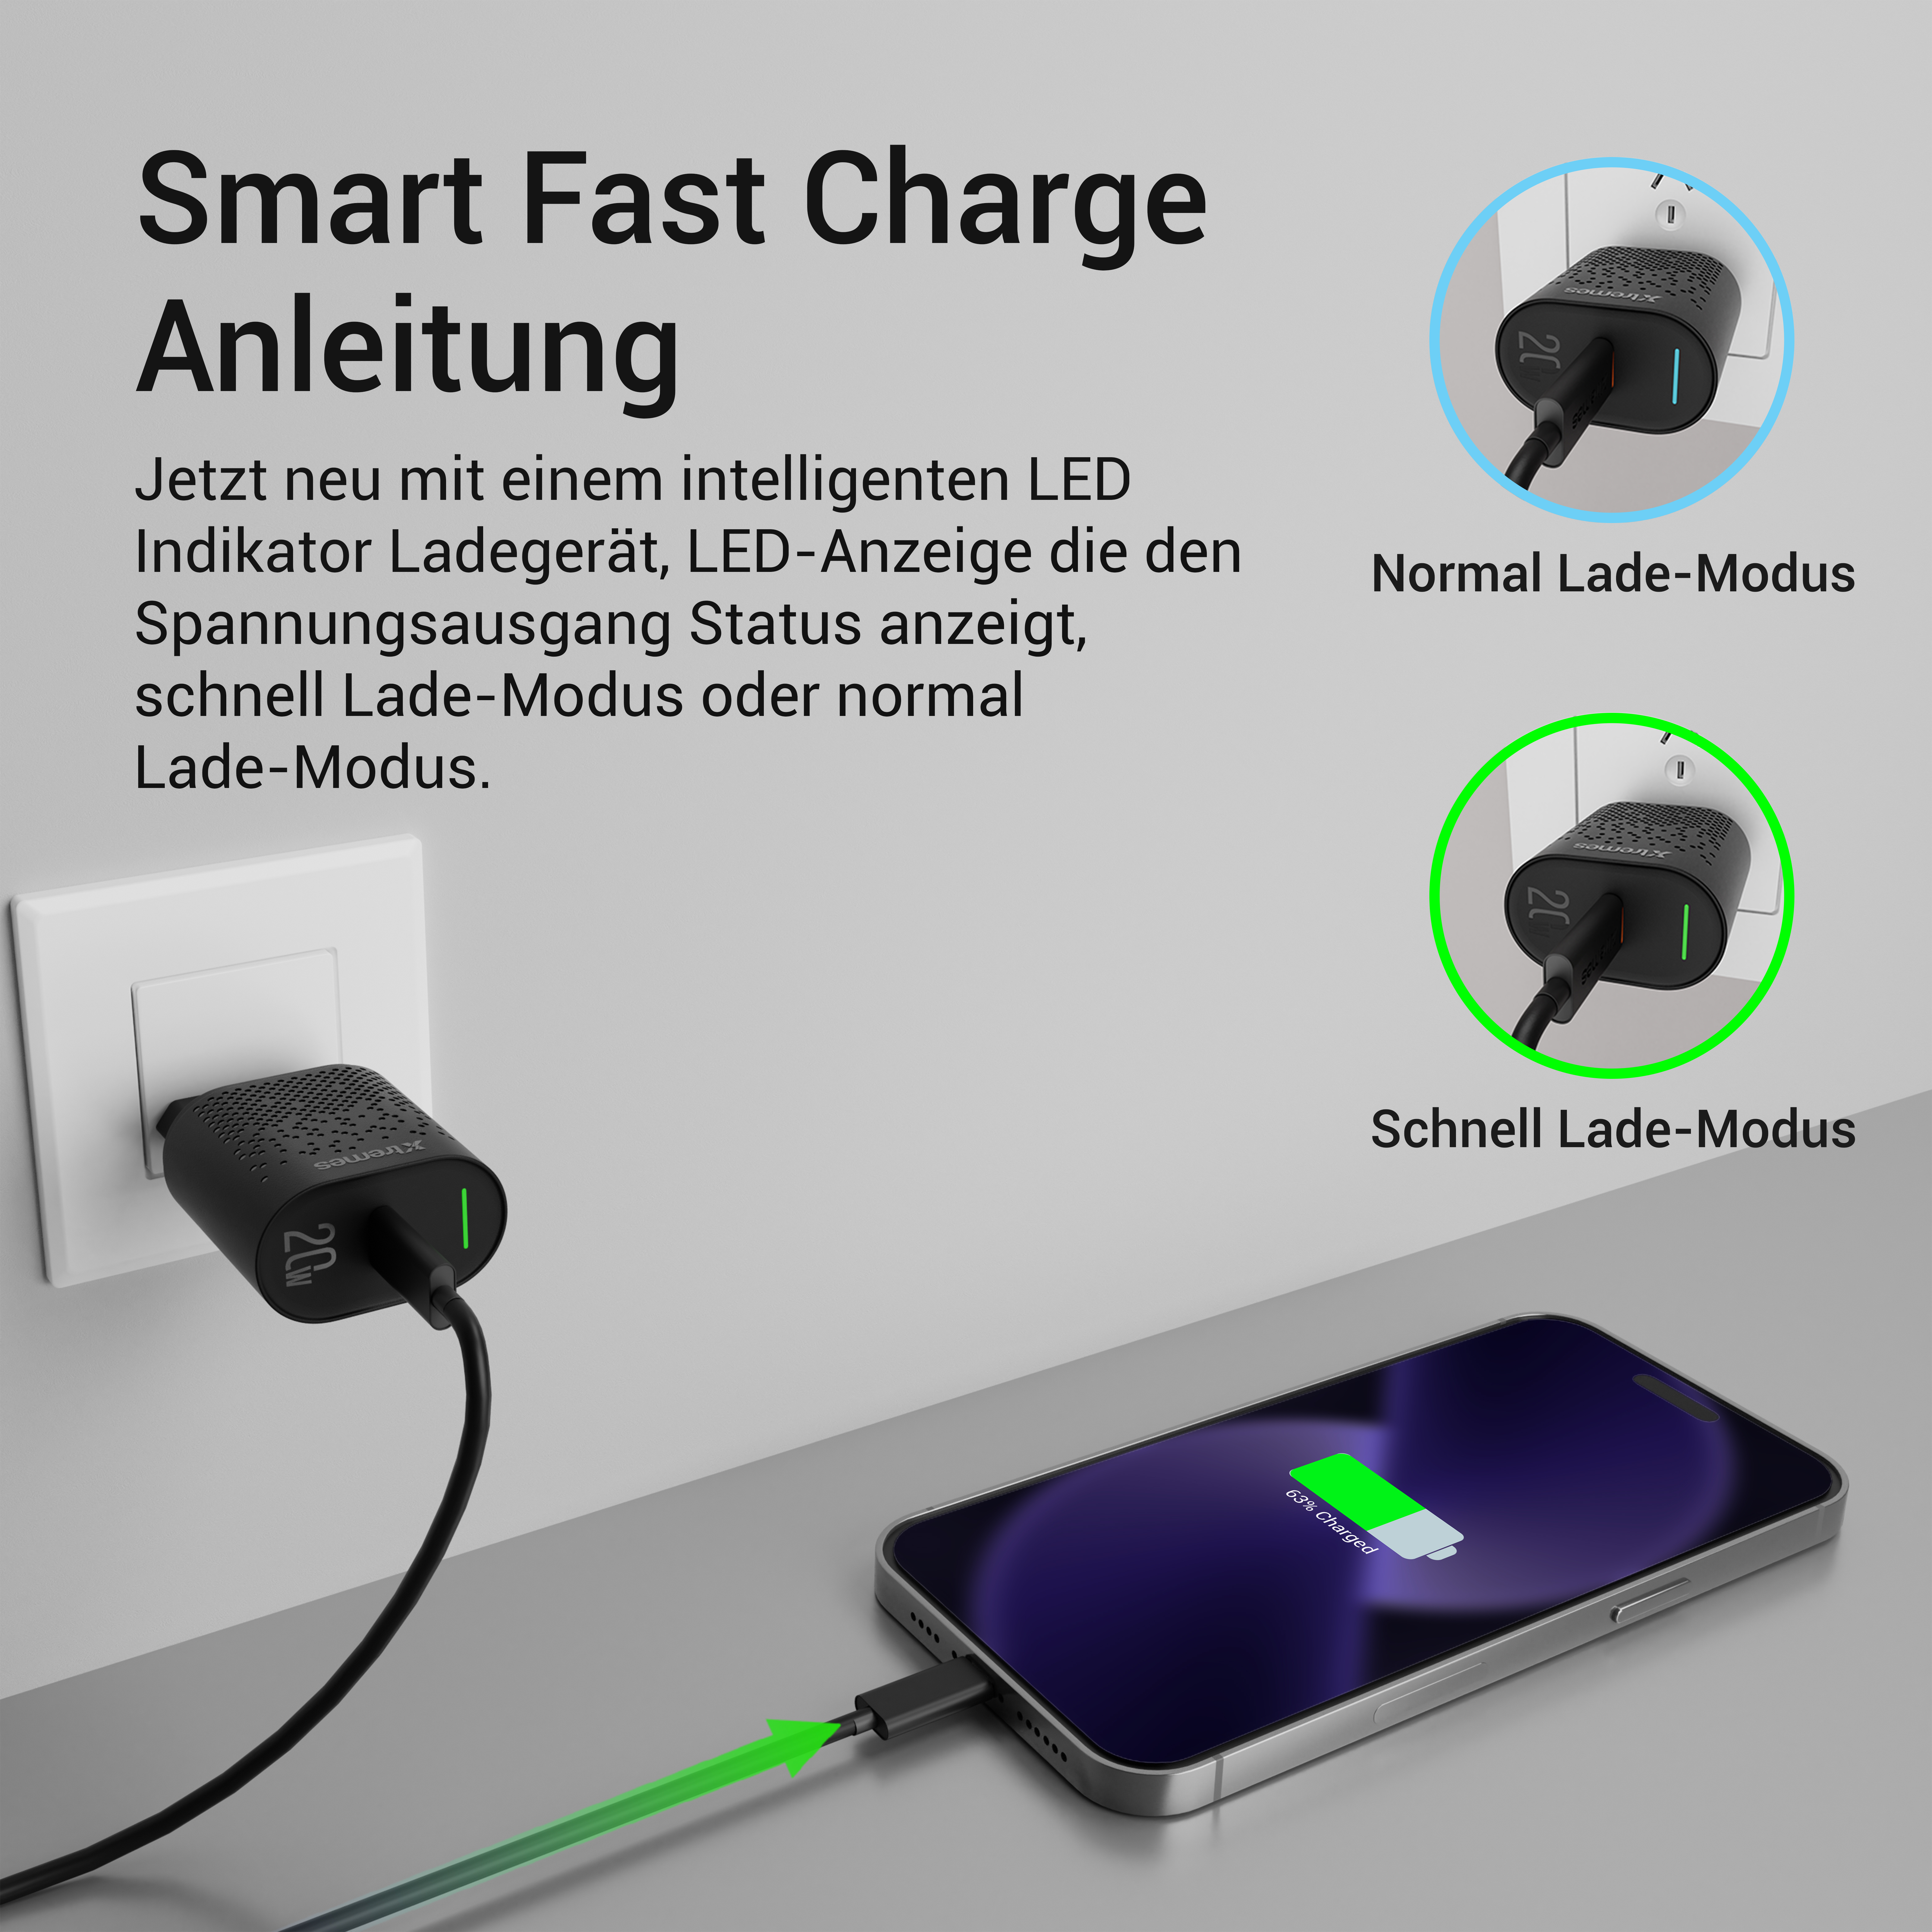 S22 Ultra/ / /Ipads, 13 Fast Pro (GC09) / White XS Pro/ Ladegerät-Adapter iPhone Charger S20 PD / SE XR MAX/ 13/13 Mini / Max / Pro/ 12 / / 20W / 14 S21+ Pro Watch Xiaomi Plus; / Galaxy 15/15 FE/ uvm., Pro/ S21 MAX, Pro / Pro 11 Pro 8/8 S10e, / 14/14 Max / Tabs Max, S10 Samsung / Airpods, /11/11 /S21/ / Kabel) 12 12/12 3.0 X S20 XS Max Huawei 15 Pro Pro XTREMES Apple (ohne